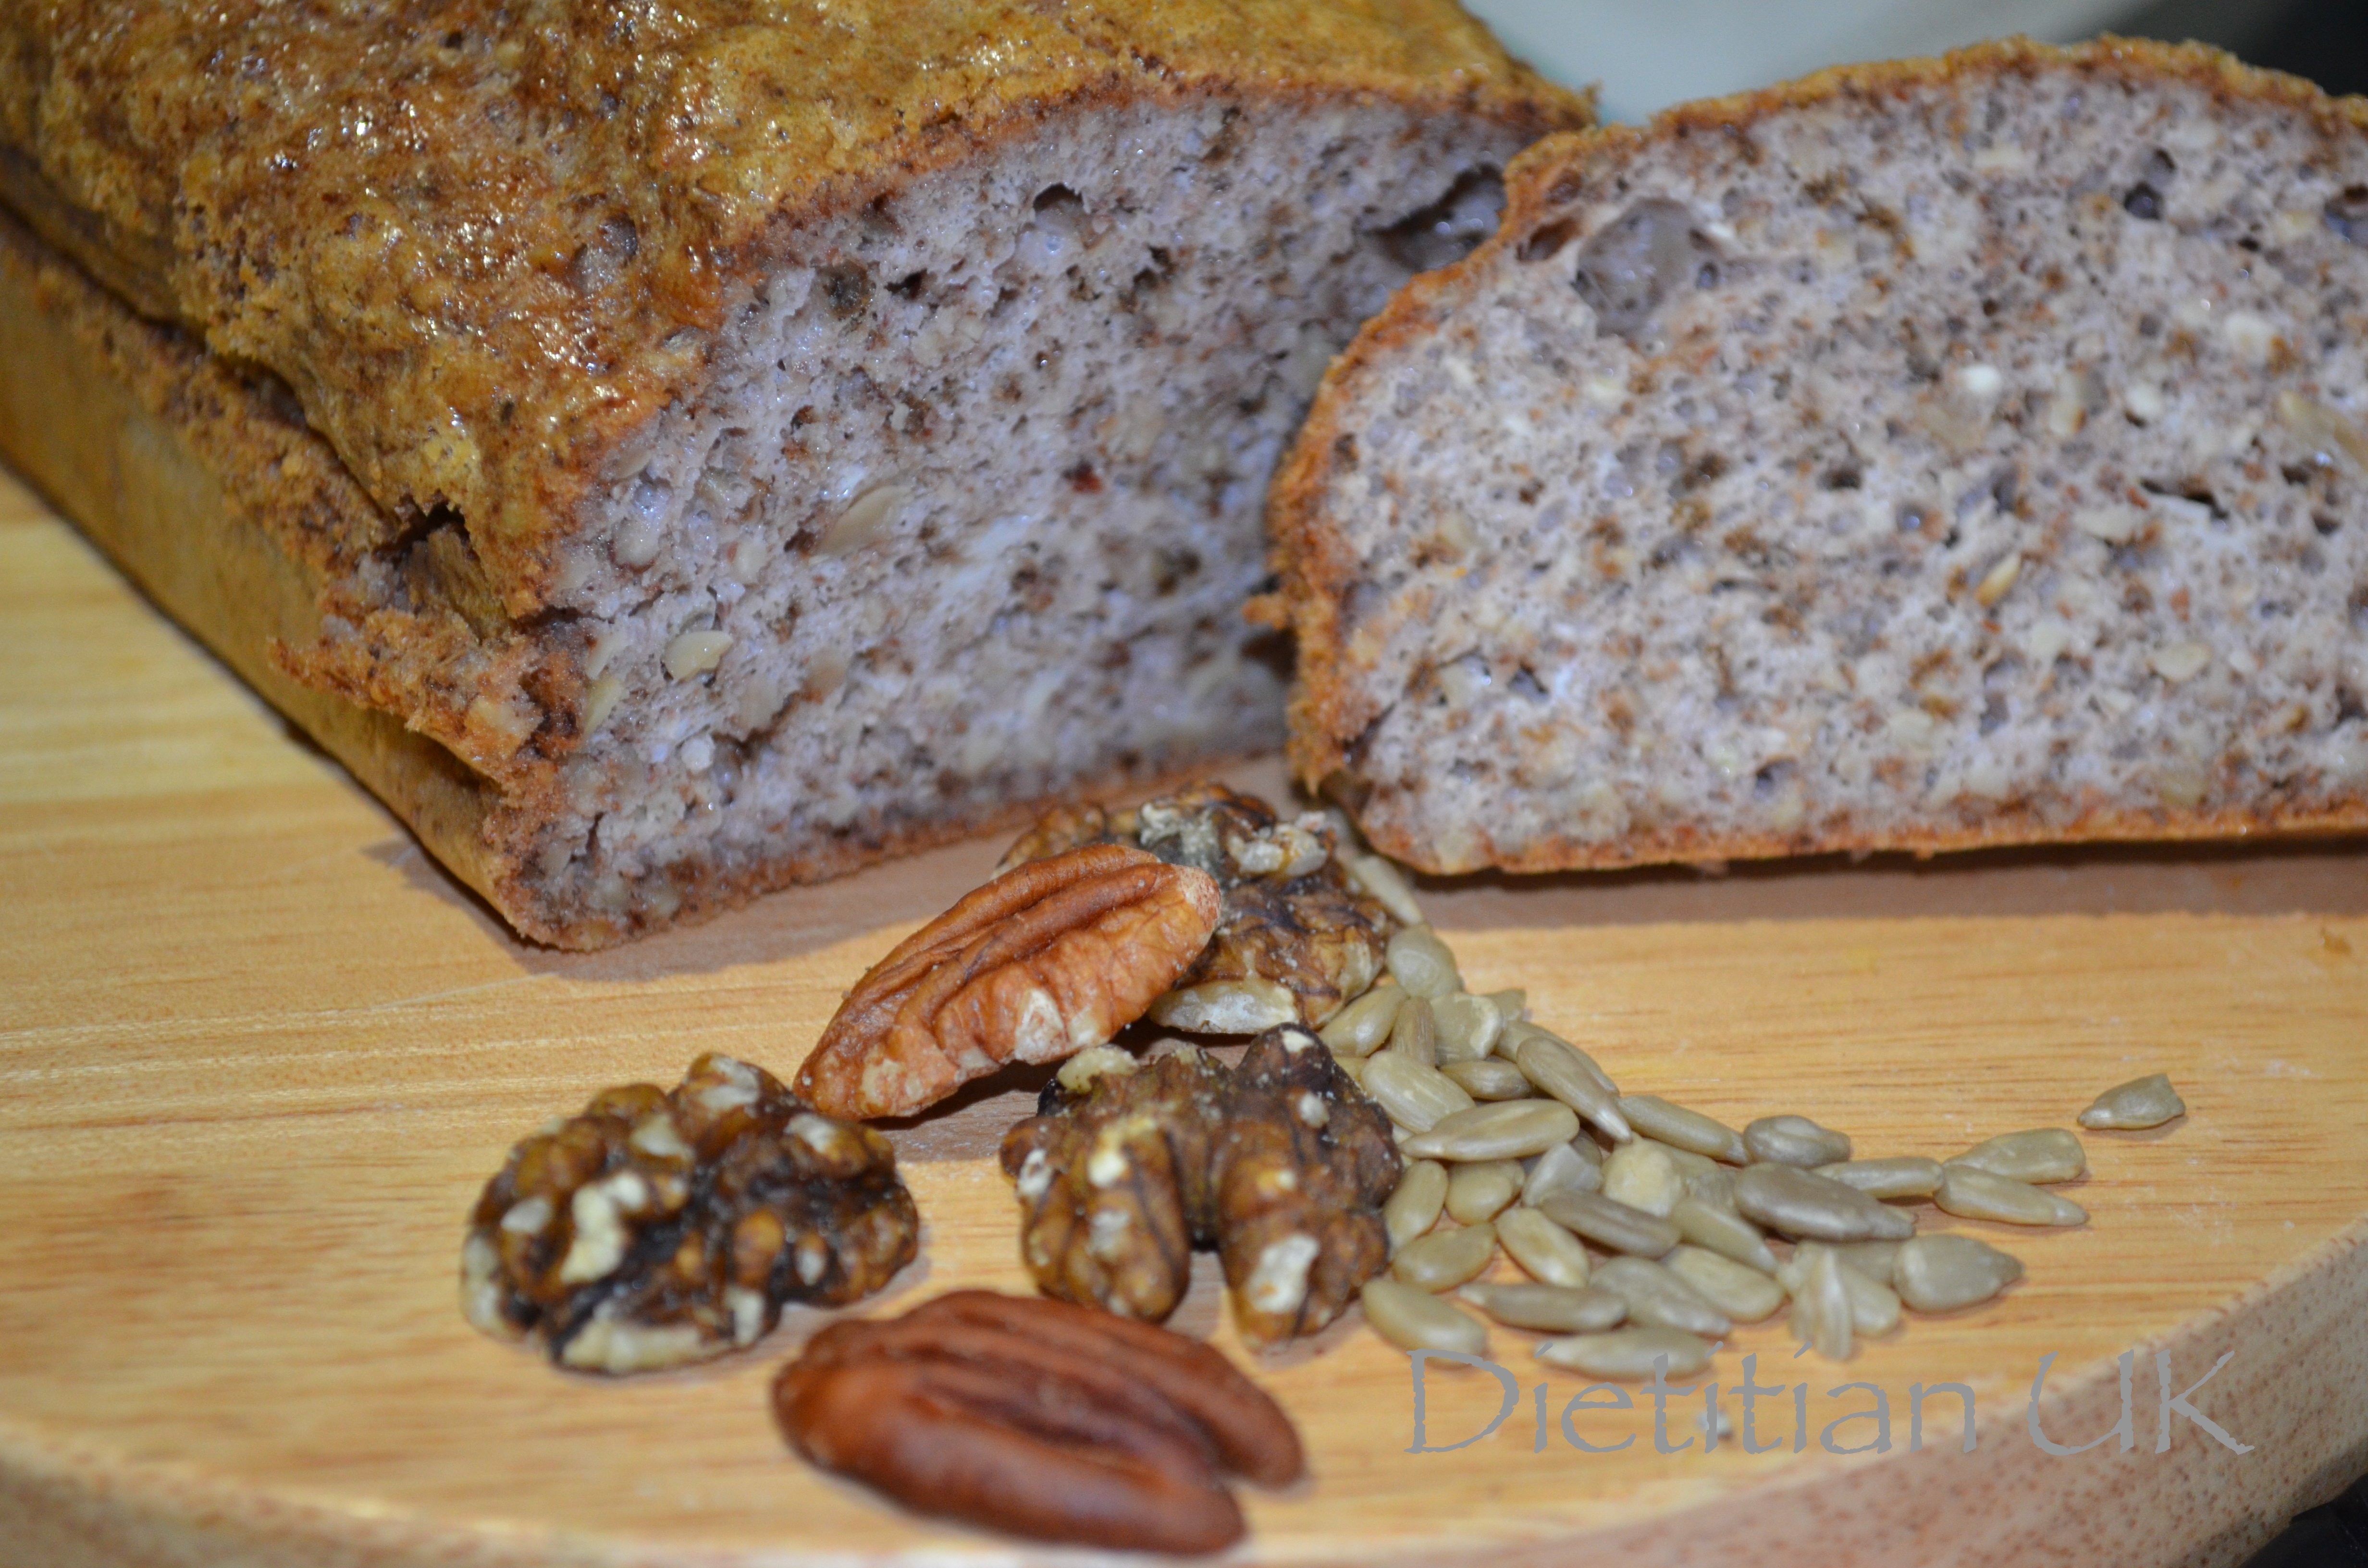 Health in a loaf: Nut and Seed Bread.